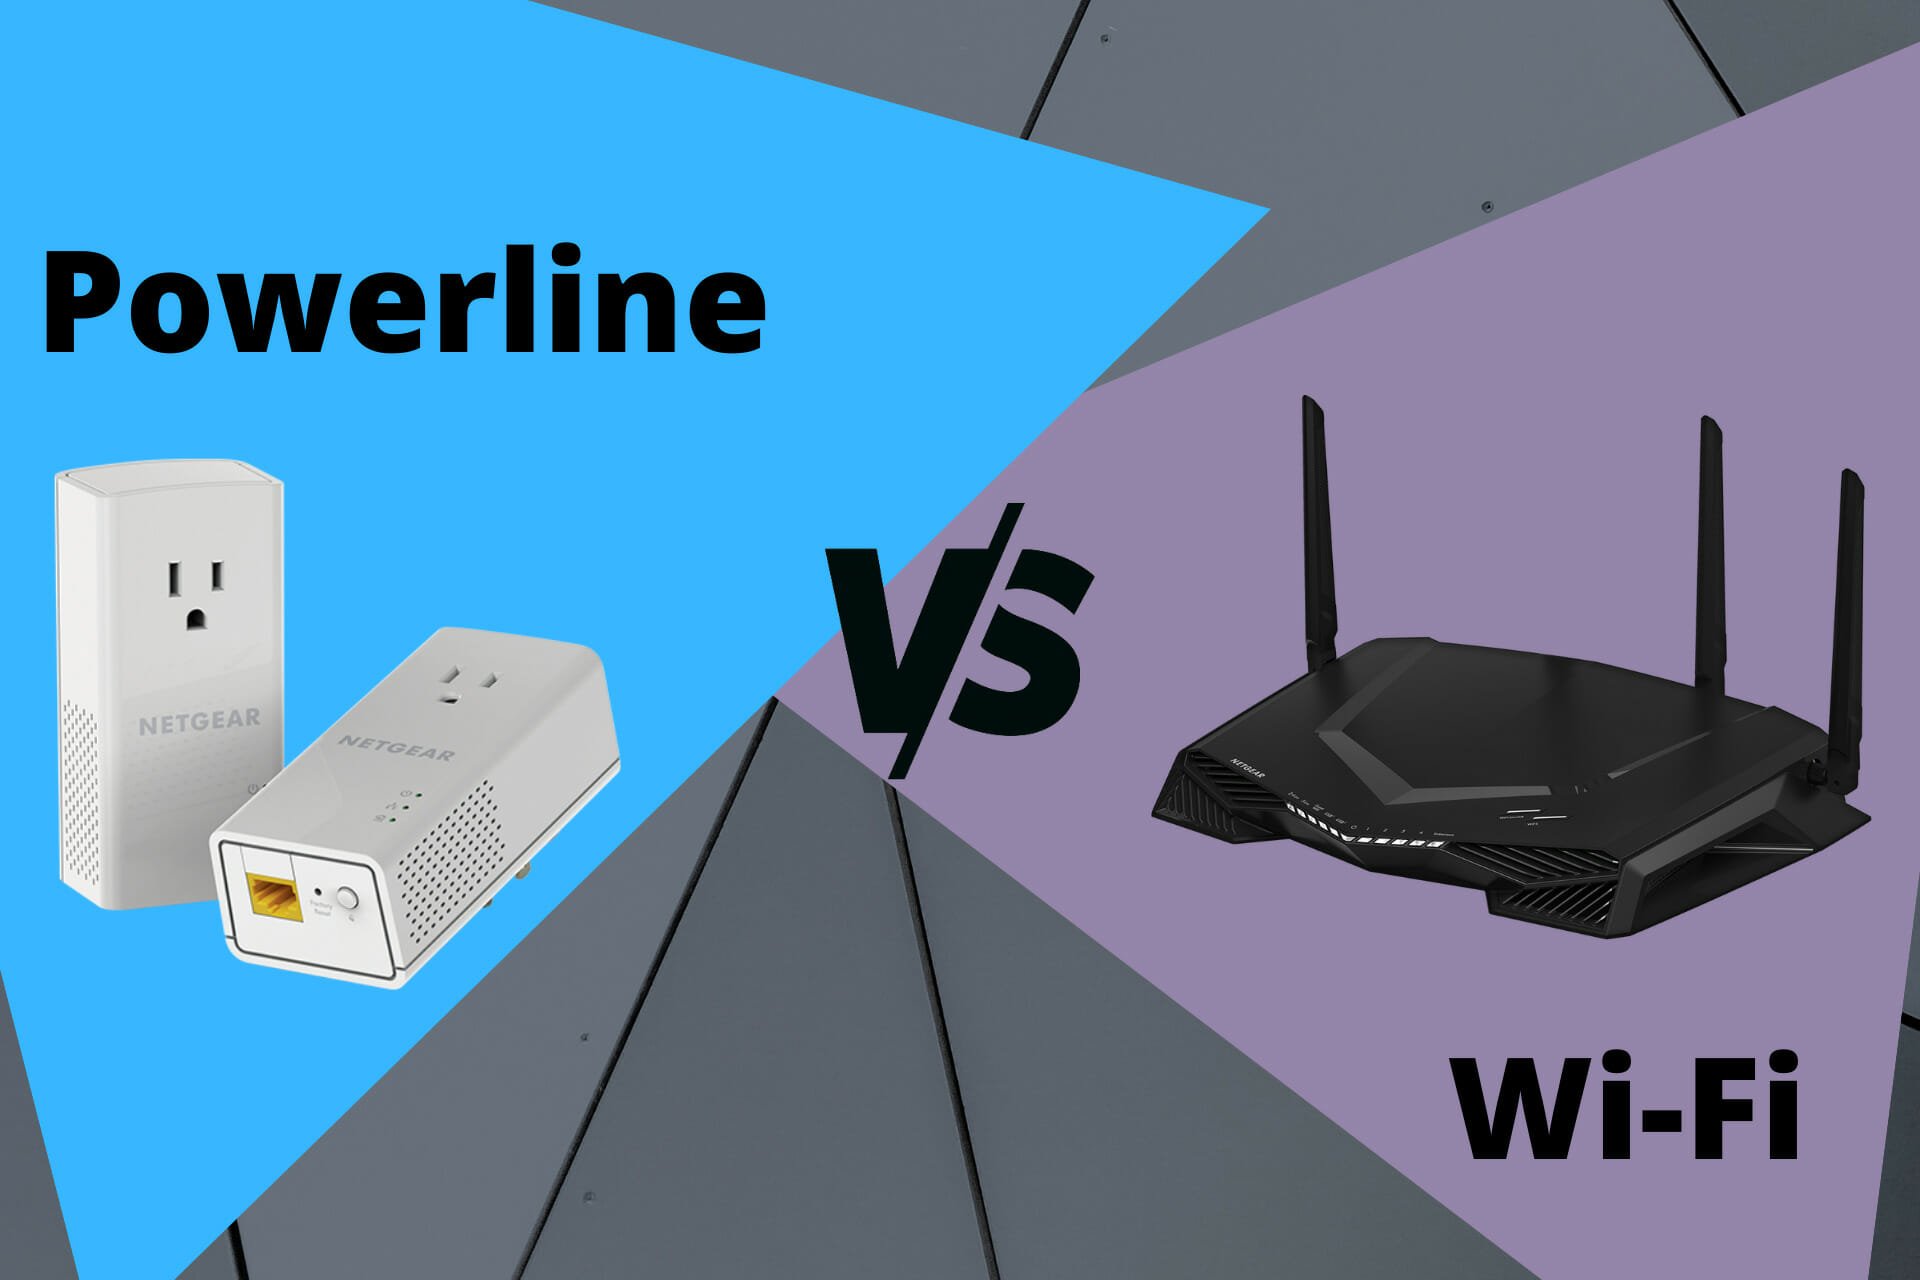 Wi-Fi vs Powerline Gaming. Which is best?